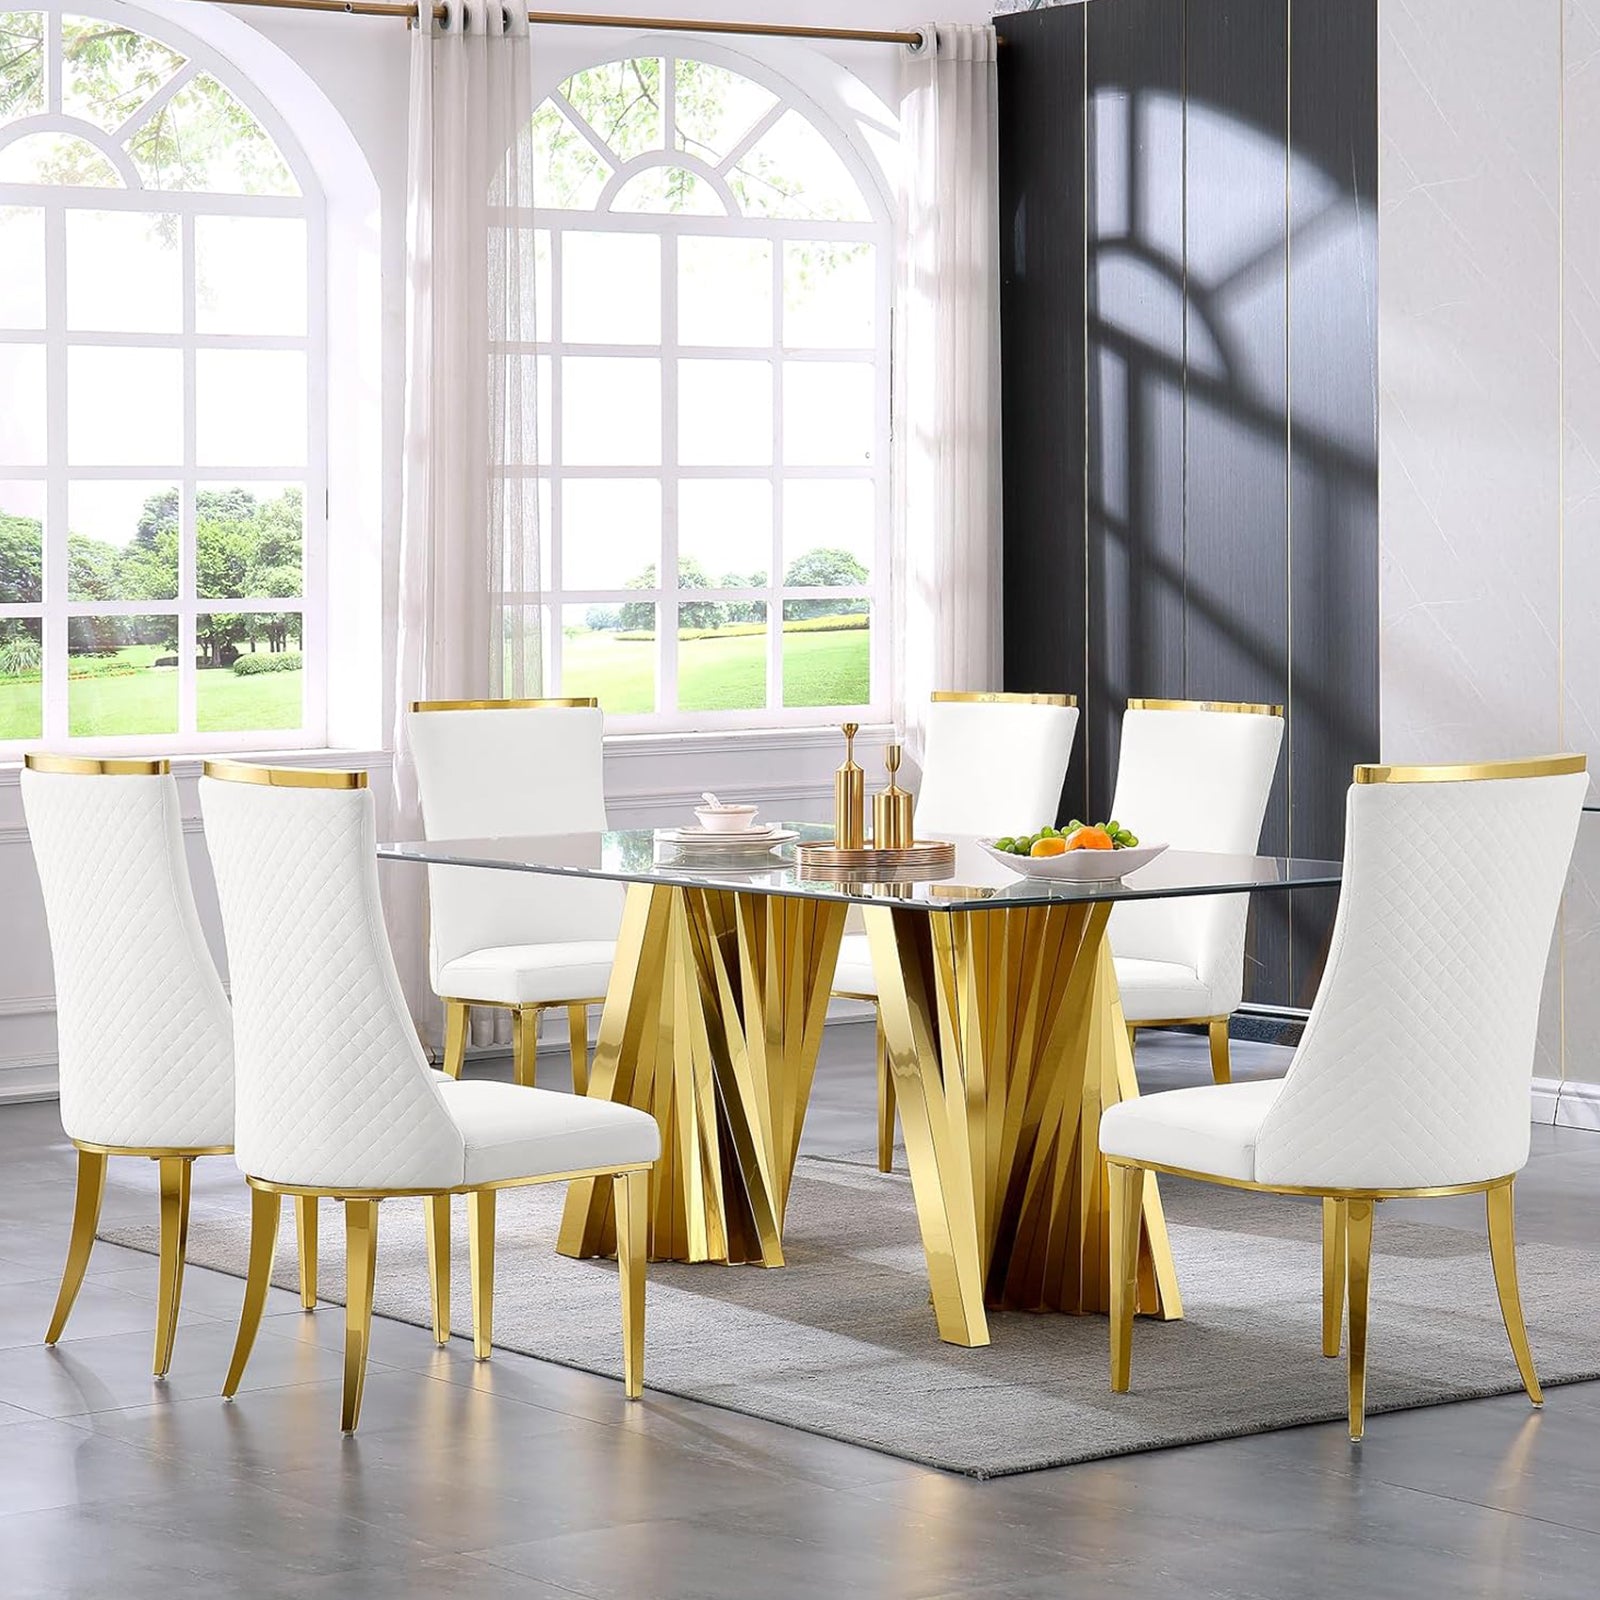 Wholesale White Velvet Dining Chairs with Reticulate Texture Back and Gold Stainless Steel Legs